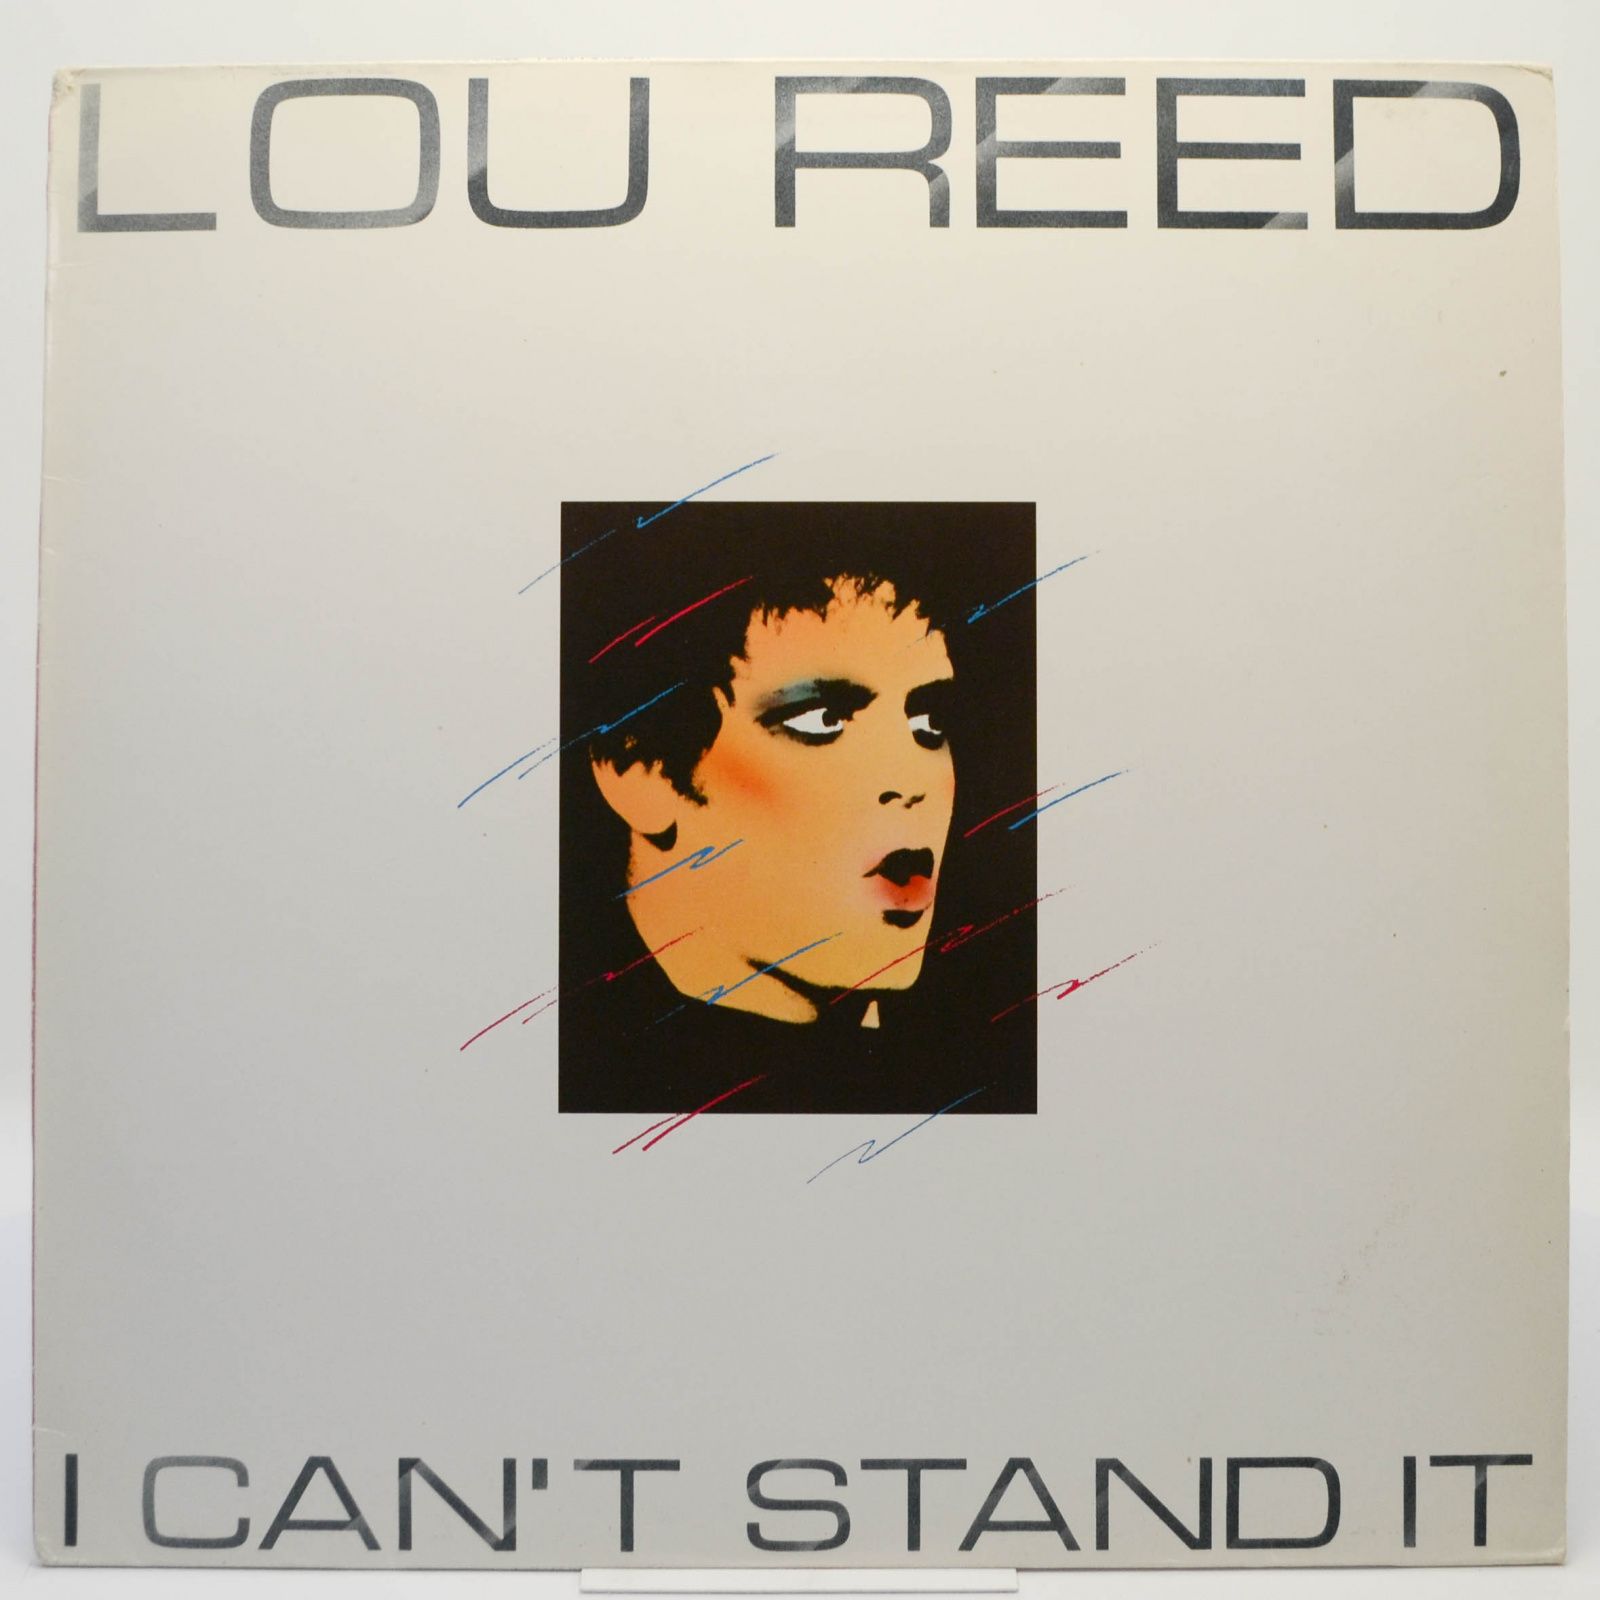 I Can't Stand It, 1982